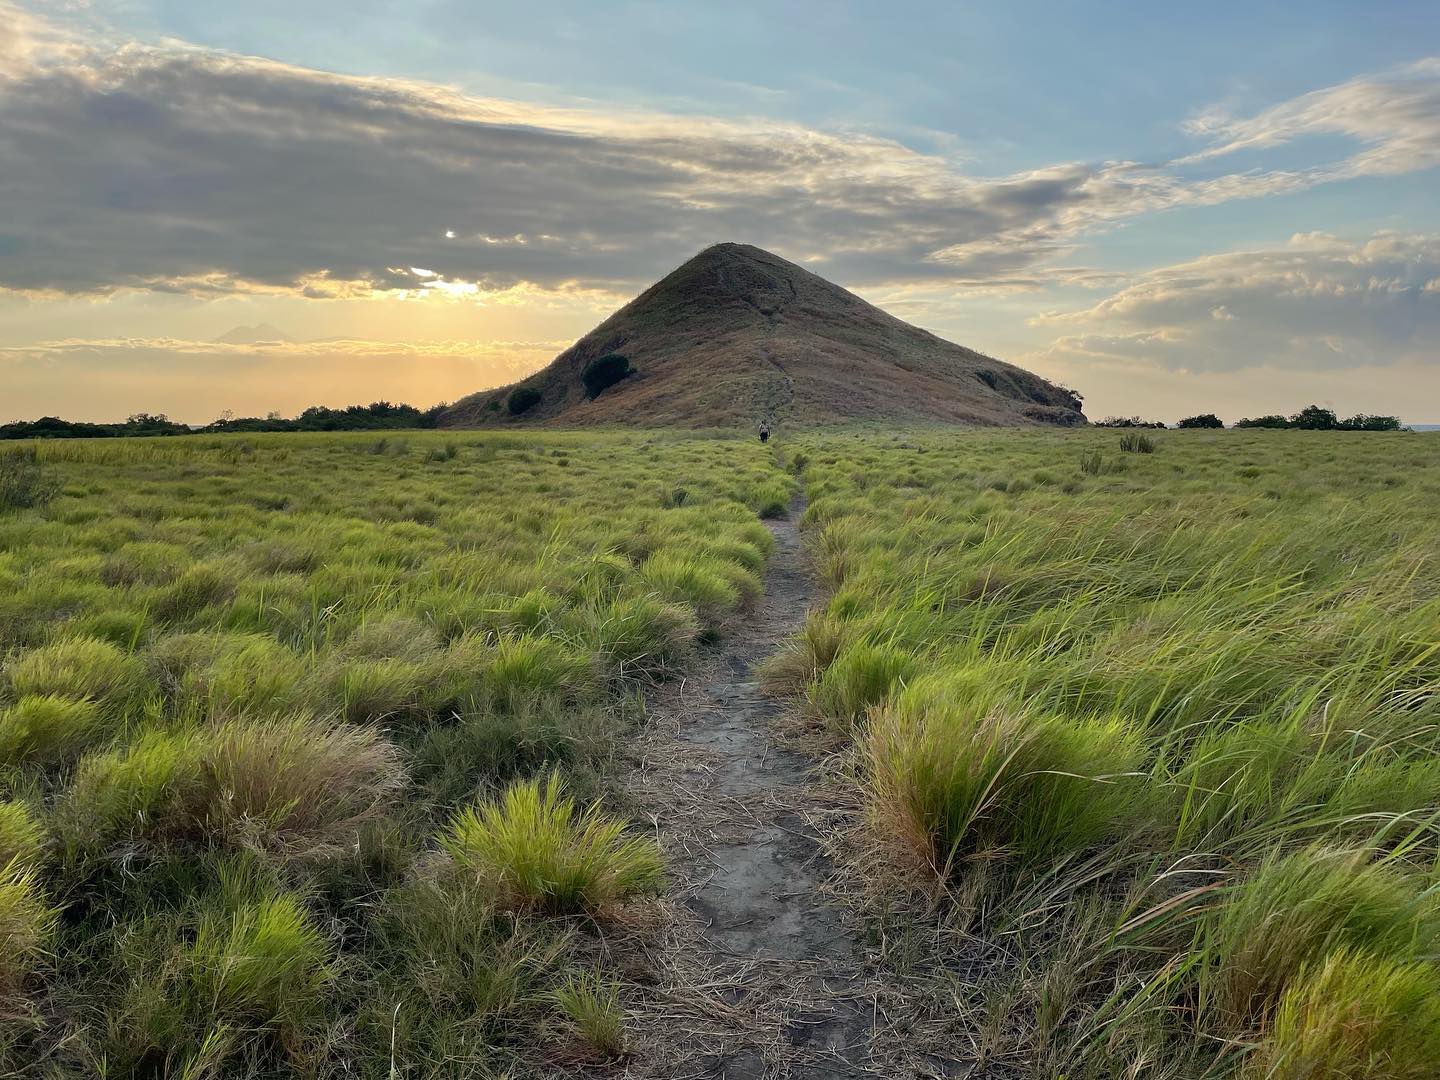 We climbed this hill all the way to the top for sunset. Ow boy… Even this was already so exhausted for me 🤣 and this was nothing compared with Padar island haha
#needtogetbackinshape 

#kenawaisland #komodotrip #worldtrip #exploreindonesia #sailingkomodo #lomboktoflores #westnusatenggara #sailinglife #boatlifestyle #backpackinglife #backpacken #wereldreis #reizen #reiziger #traveler #ig_travelerworld #worldcaptures #islandlife #tropicalislands